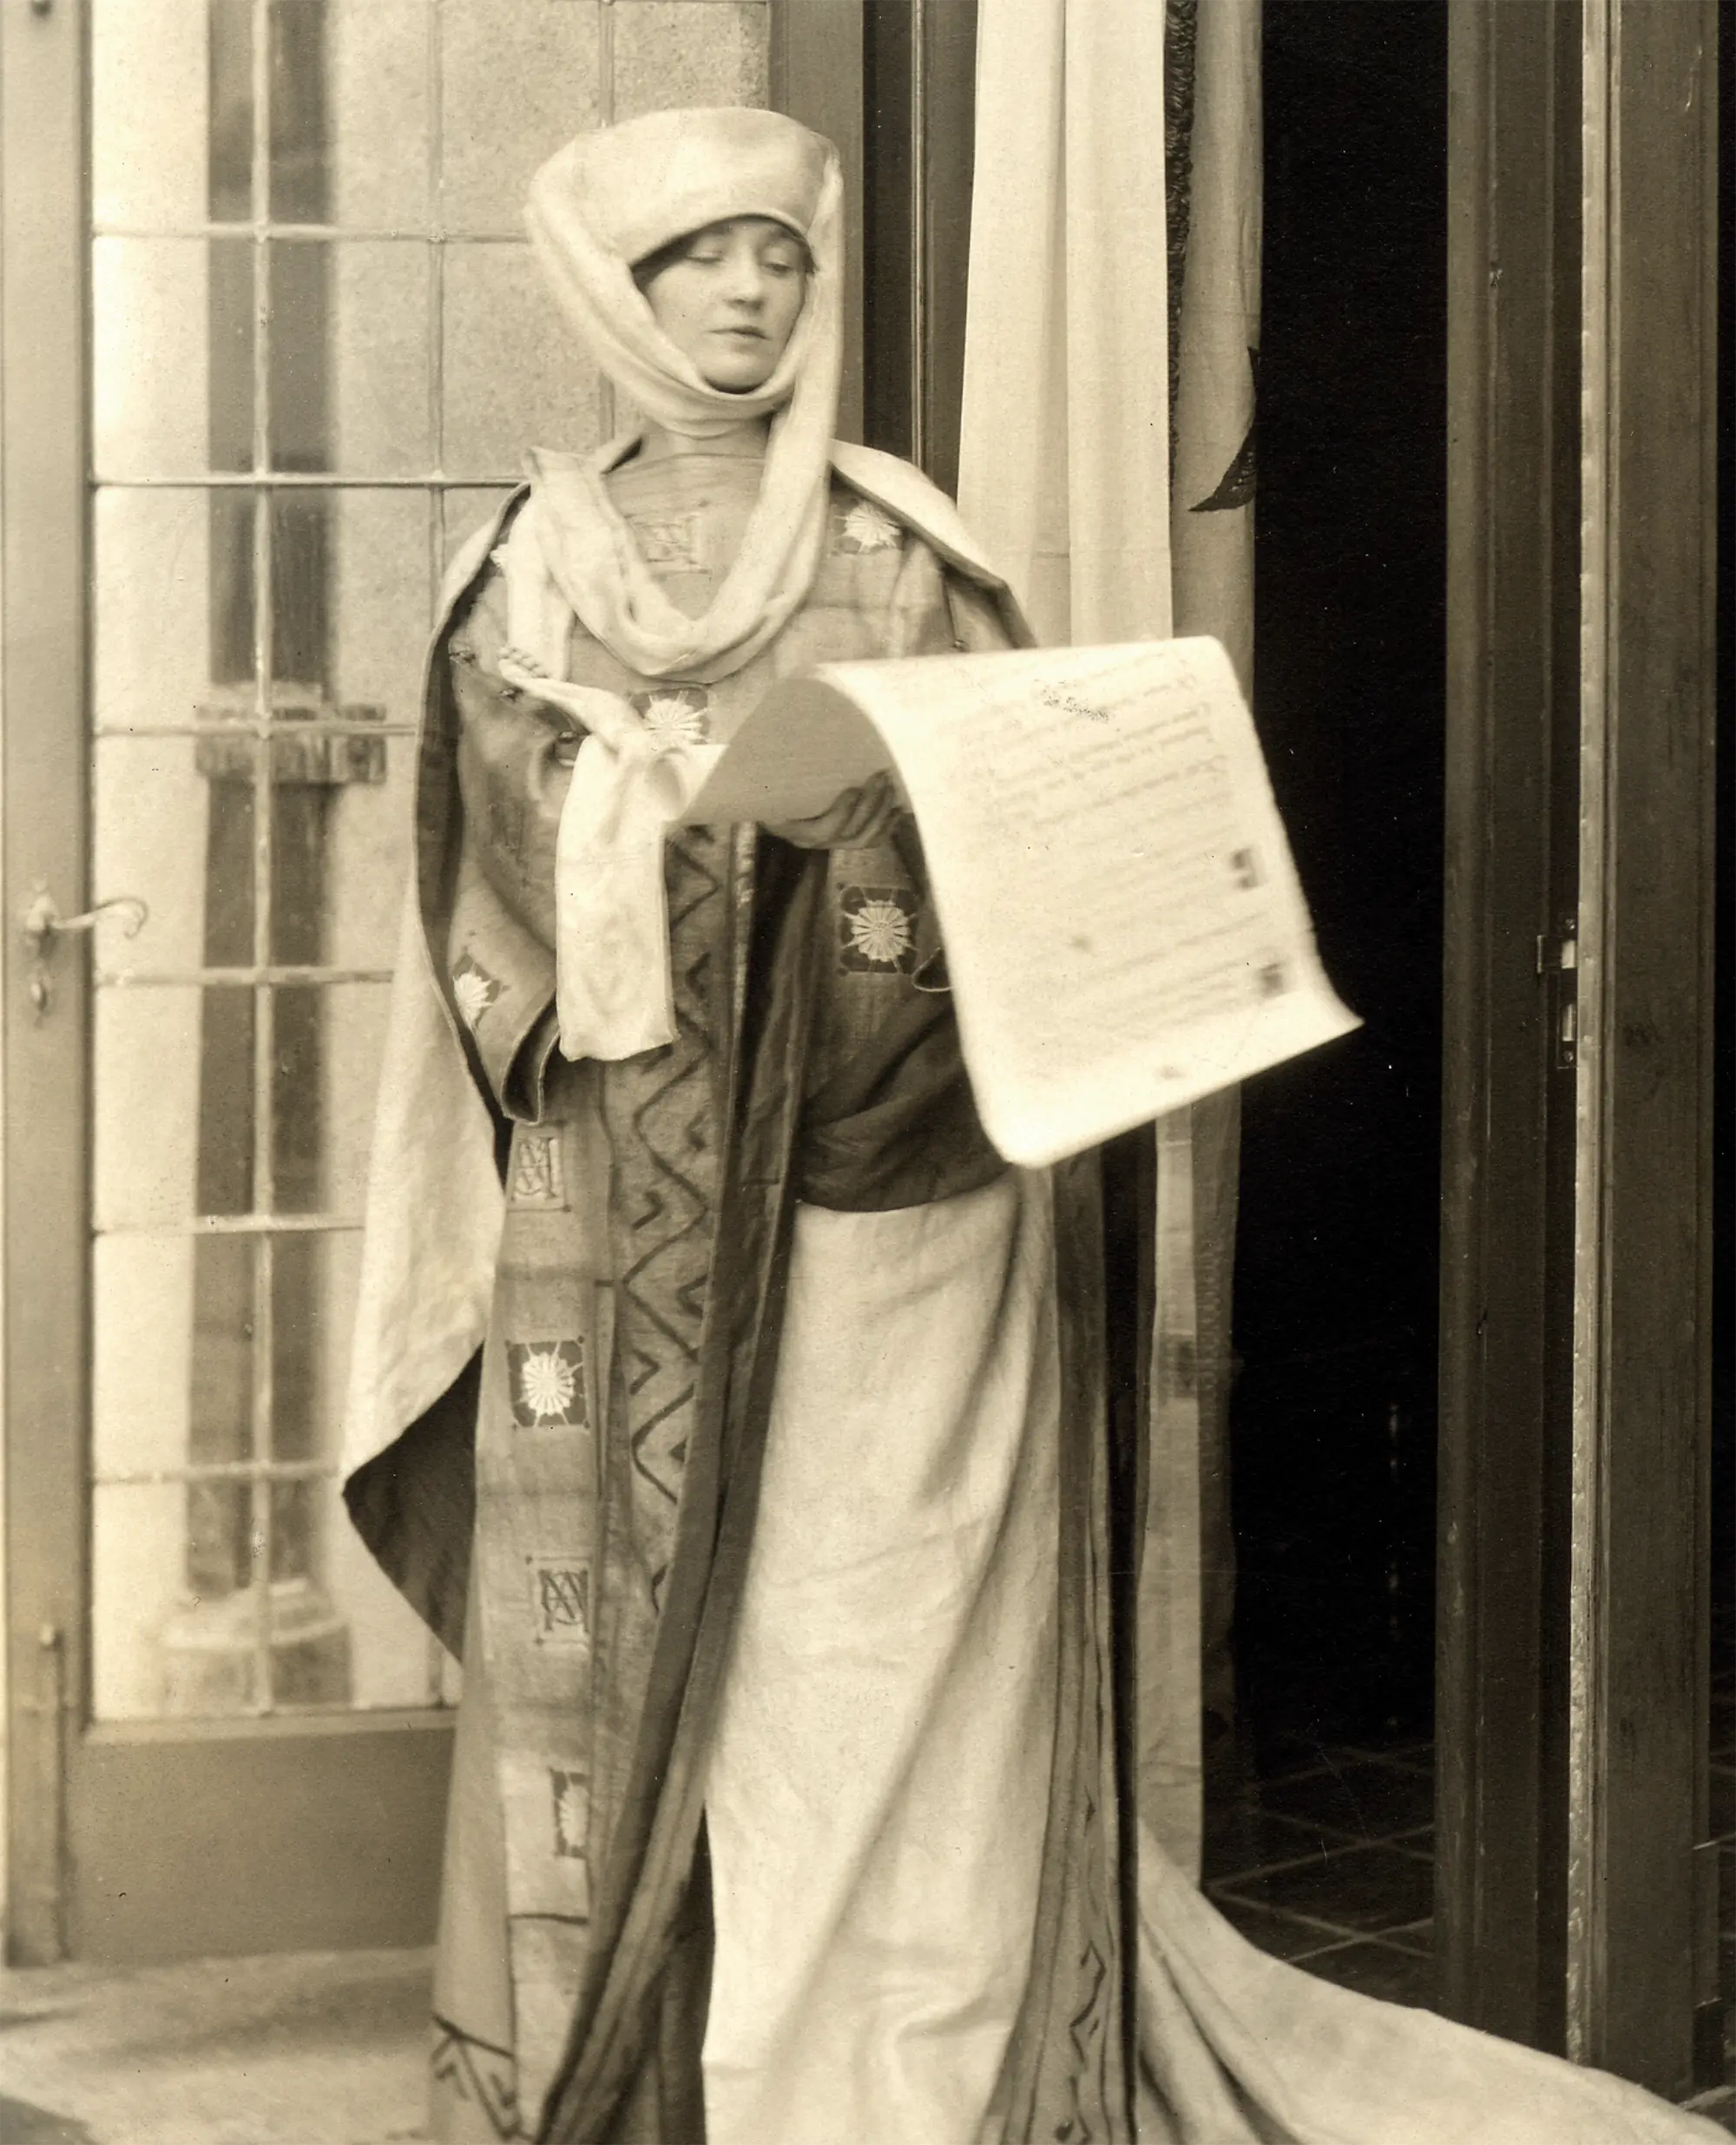 Elizabeth Coonley dressed in medieval dress presented the Scroll of Gifts